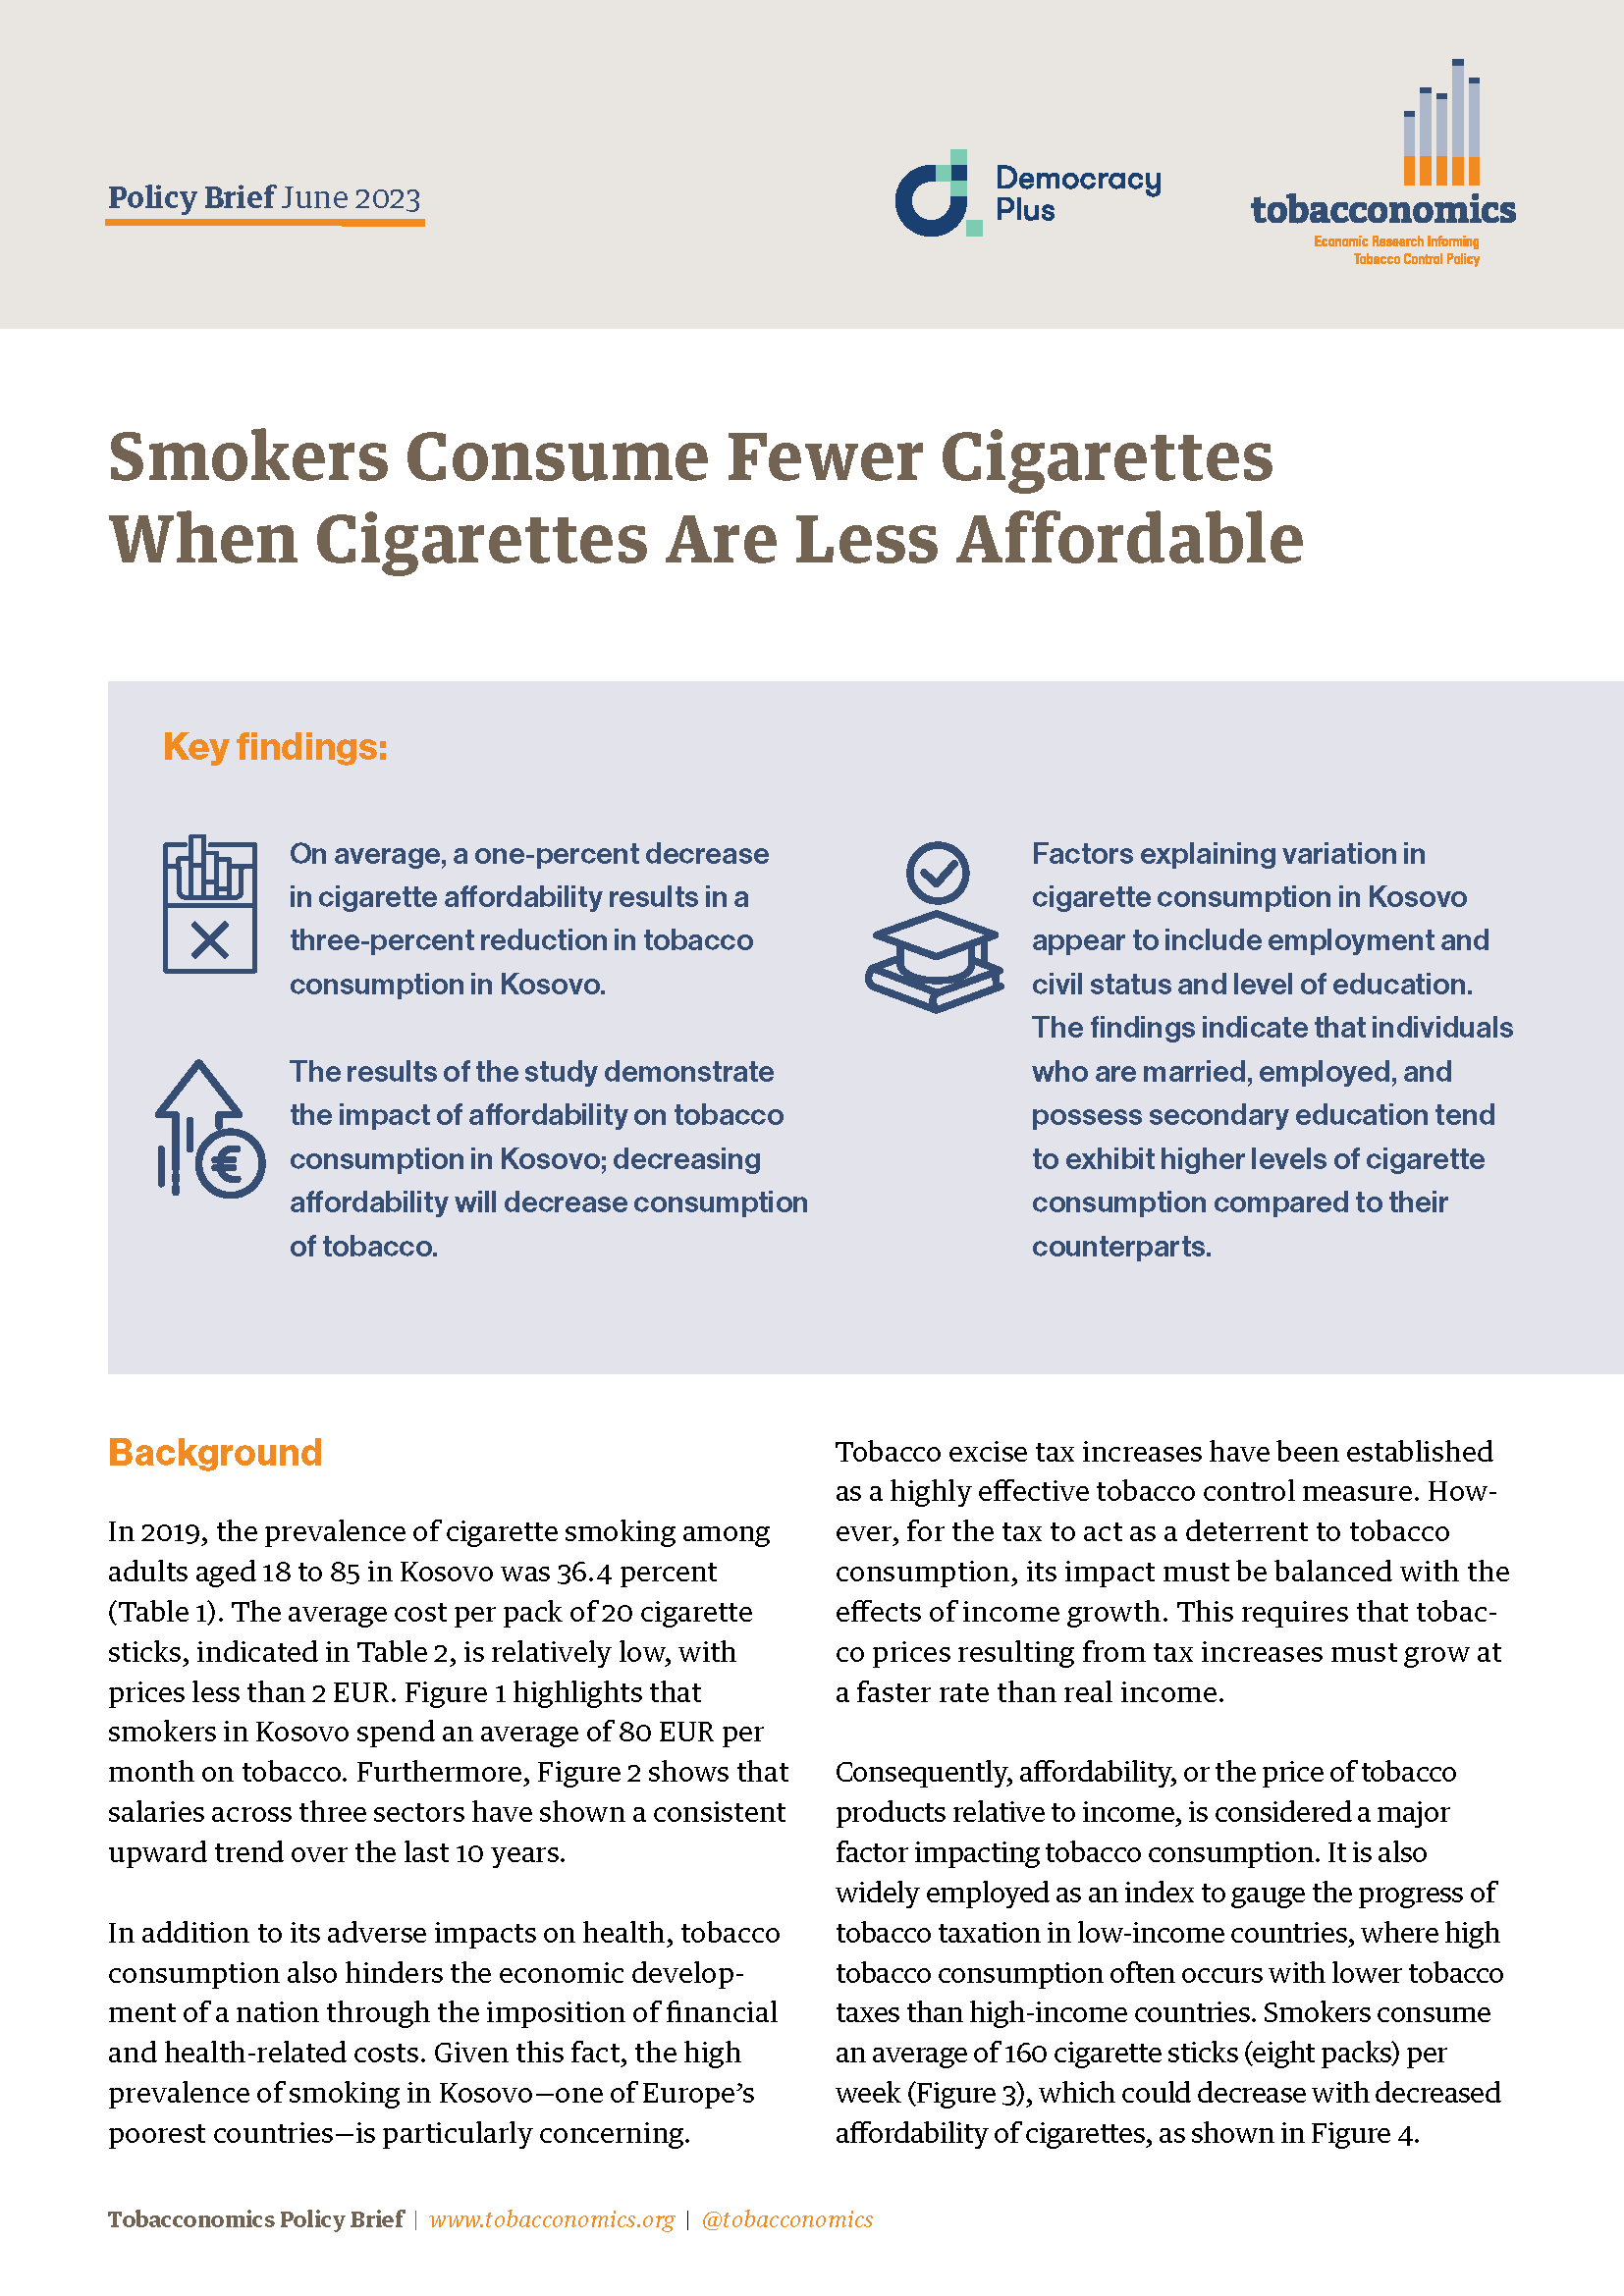 Smokers Consume Fewer Cigarettes When Cigarettes Are Less Affordable